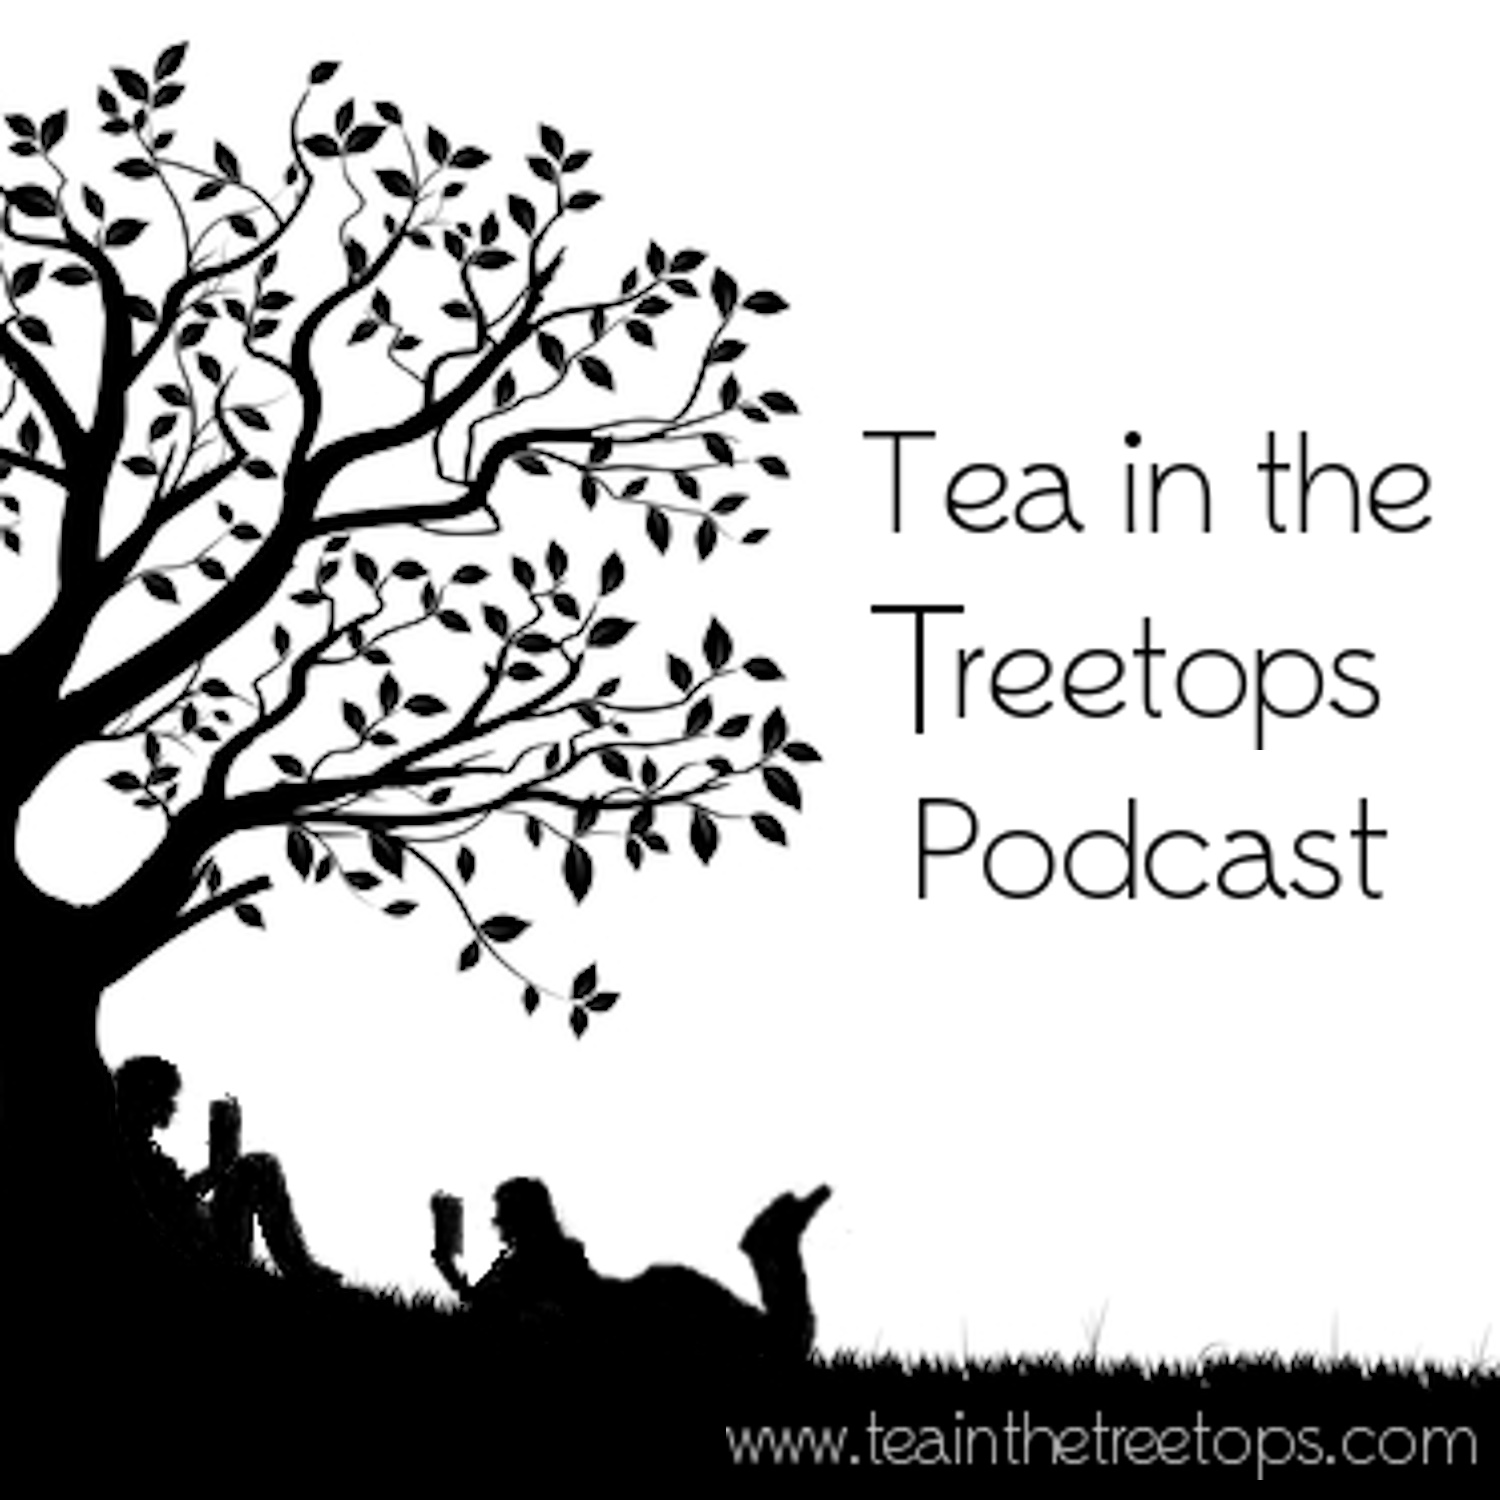 Tea in the Treetops Podcast